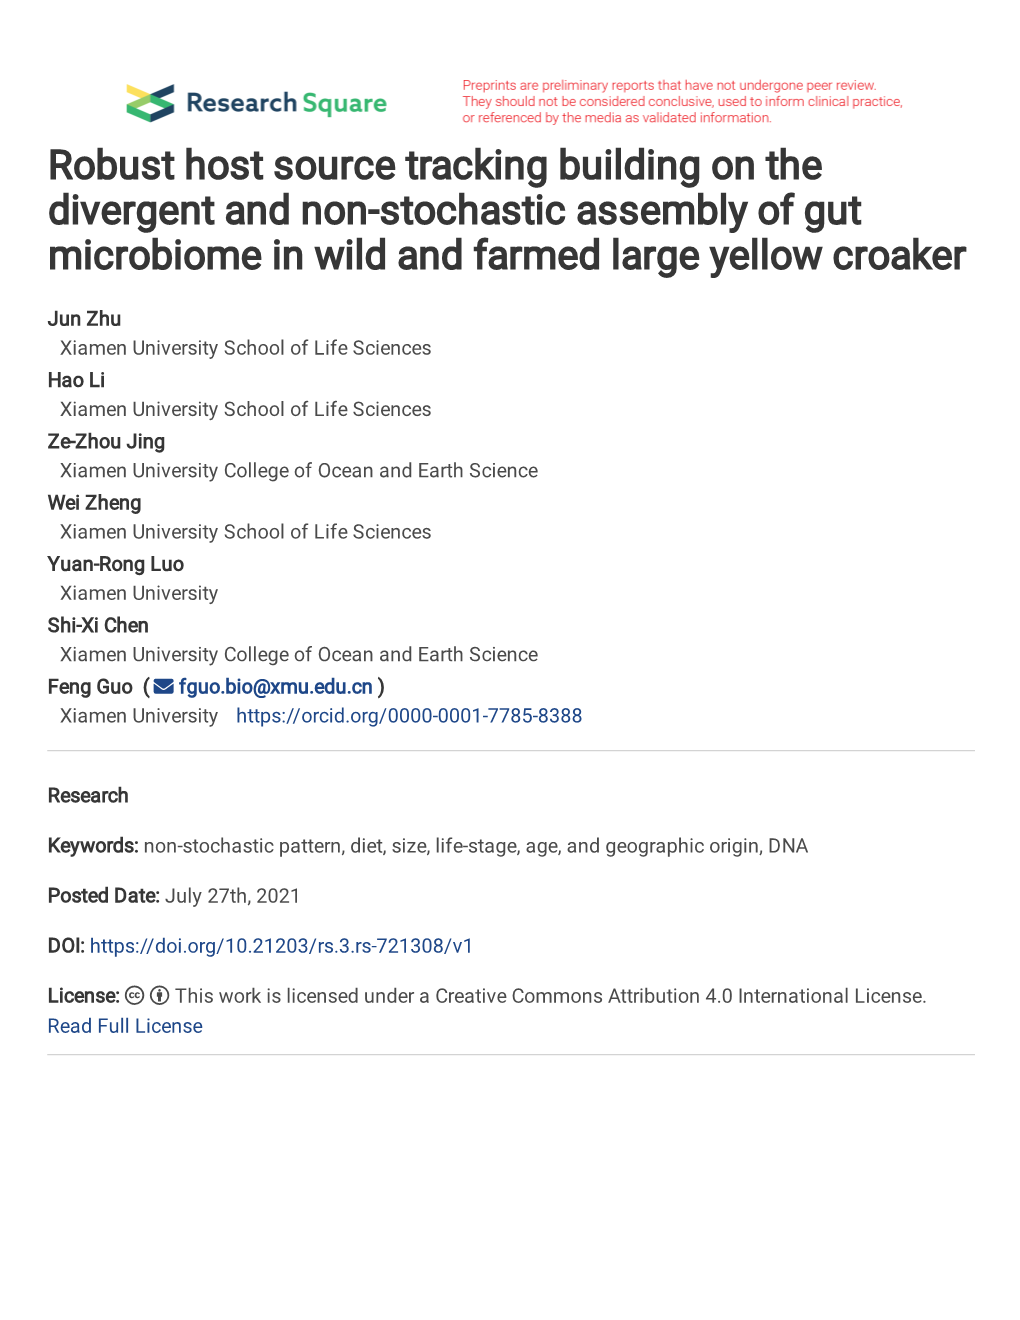 Robust Host Source Tracking Building on the Divergent and Non-Stochastic Assembly of Gut Microbiome in Wild and Farmed Large Yellow Croaker